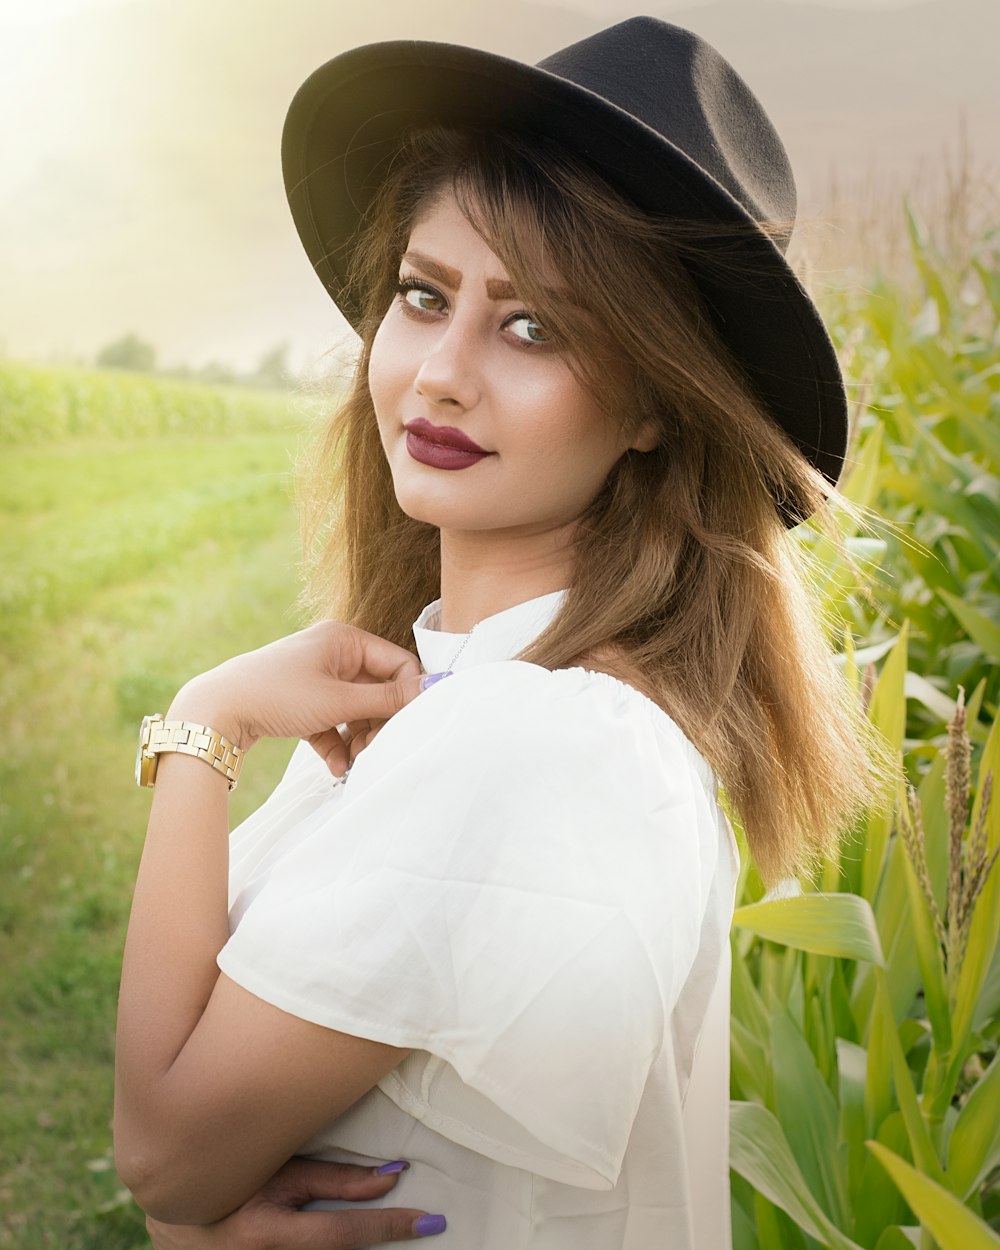 woman in white sleeveless shirt wearing black hat standing on green grass field during daytime